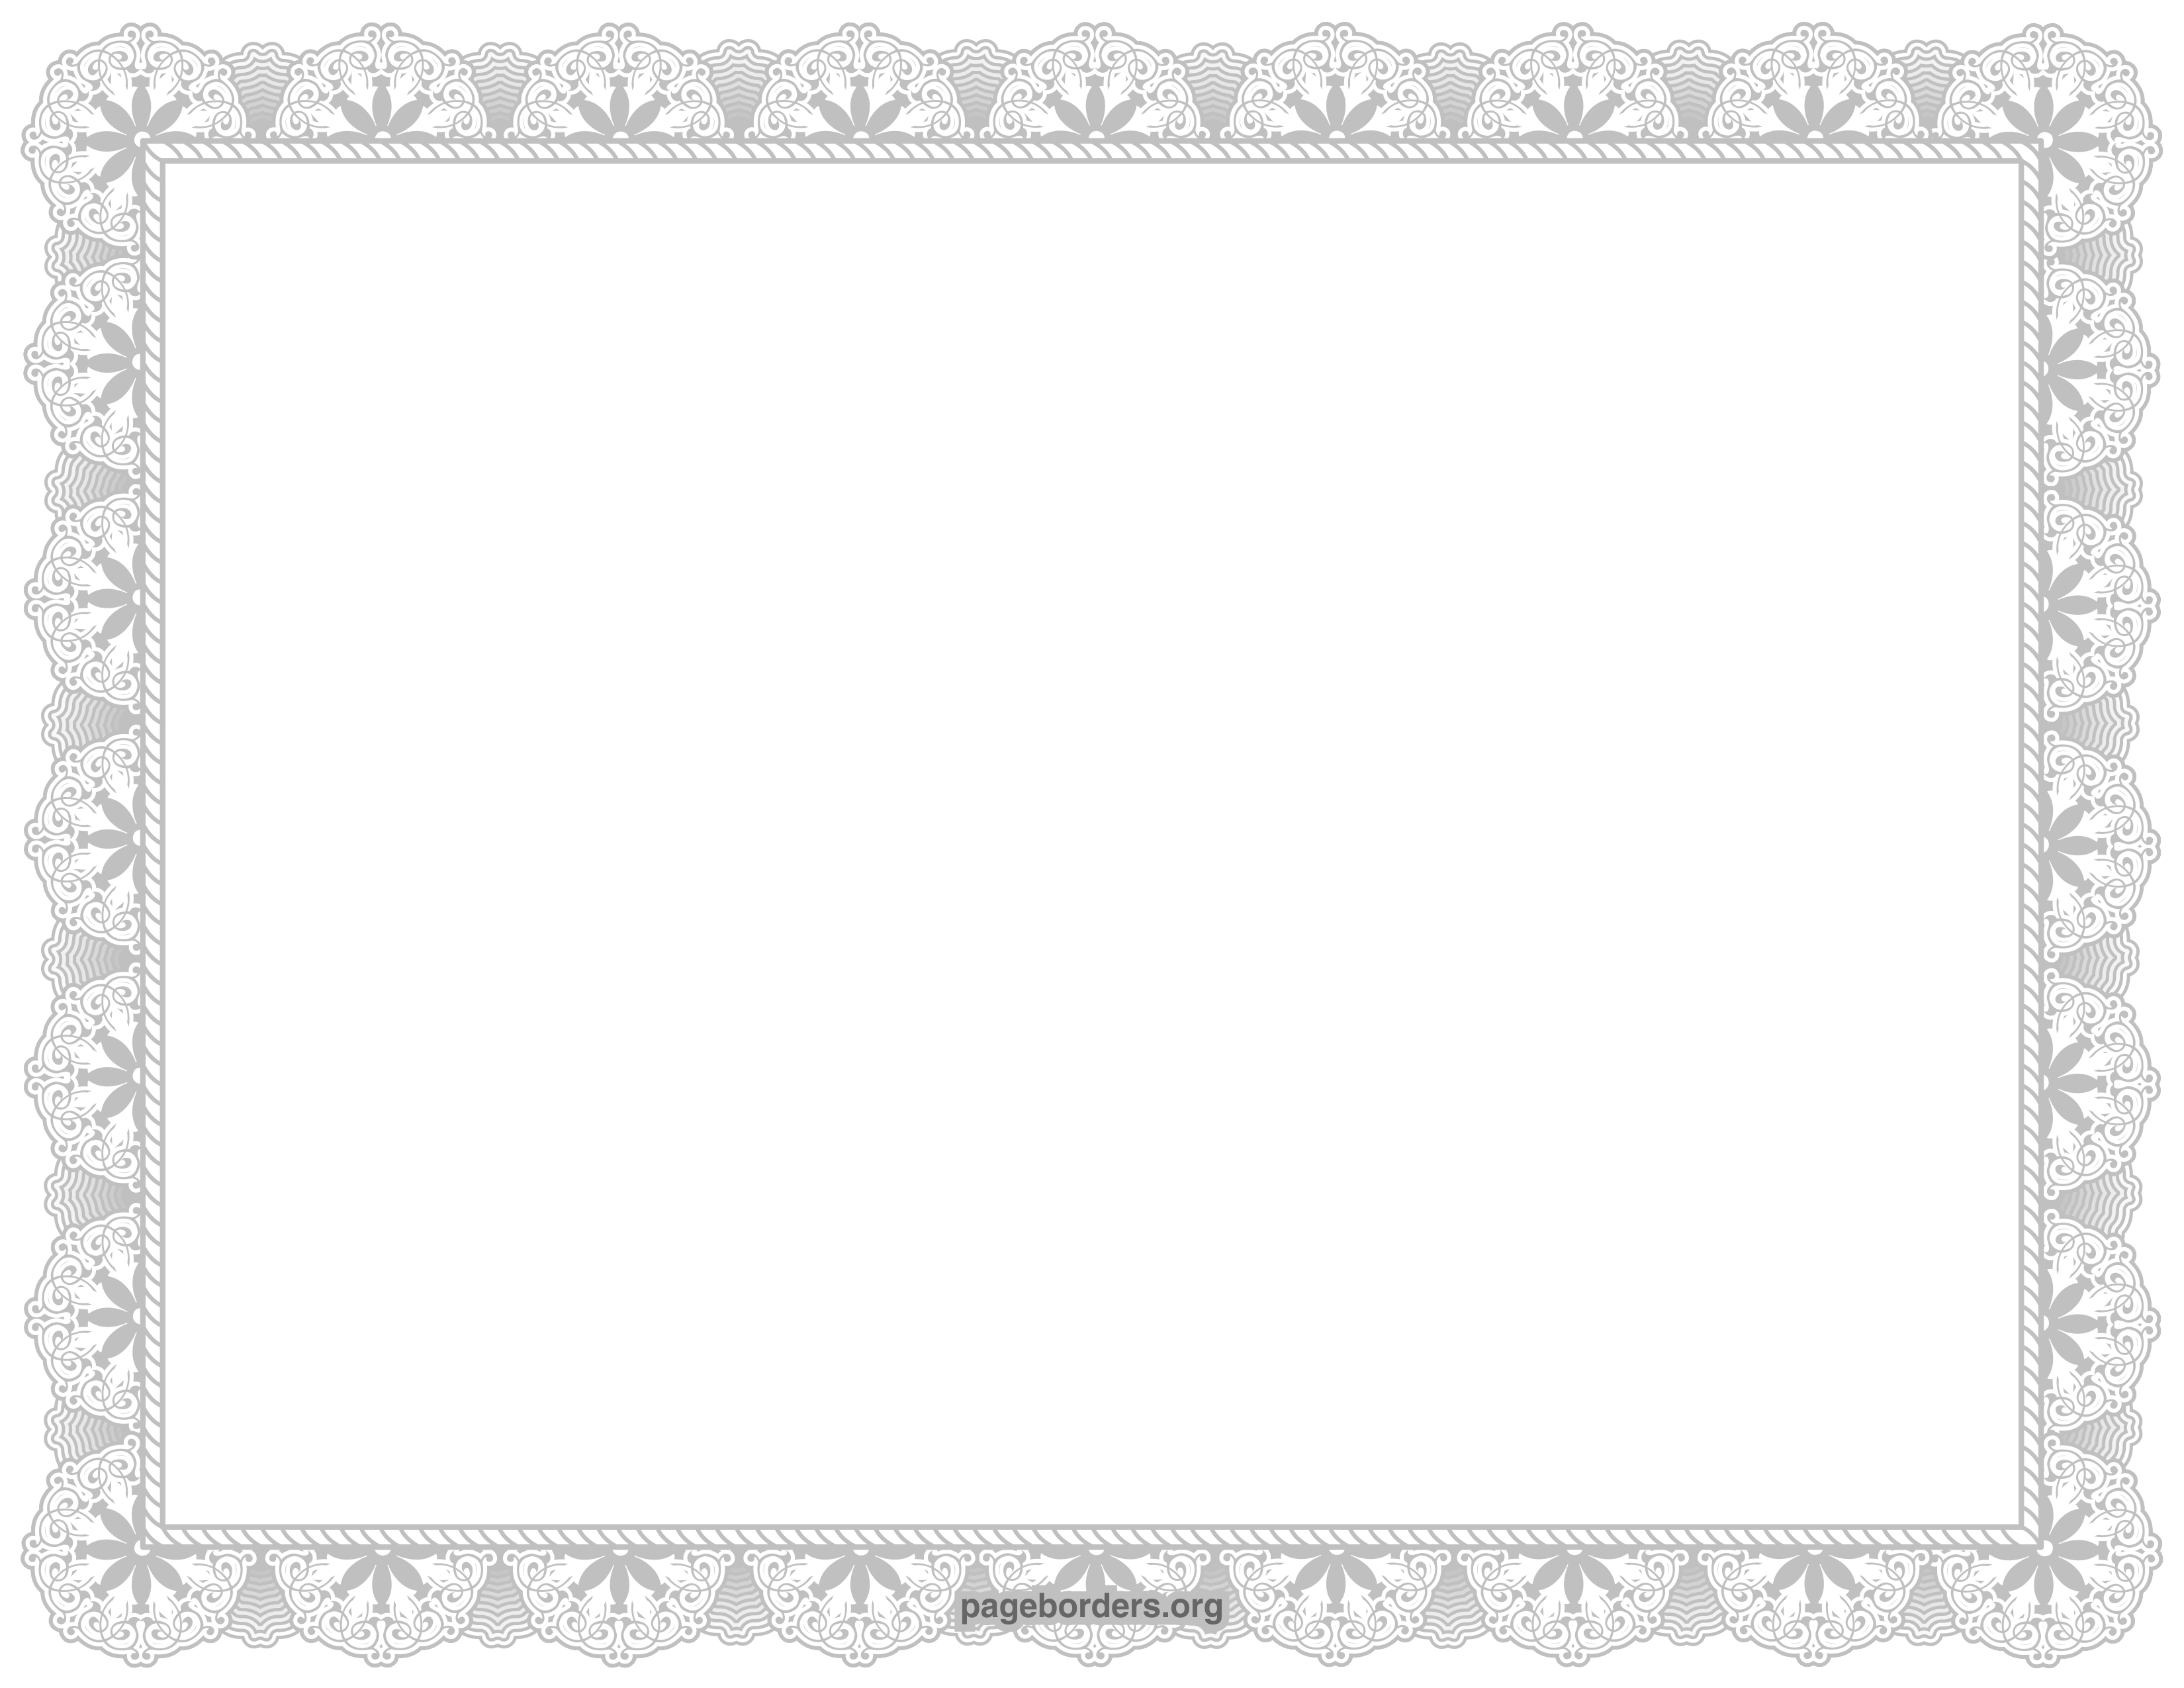 Certificate Border Image - Clipart library